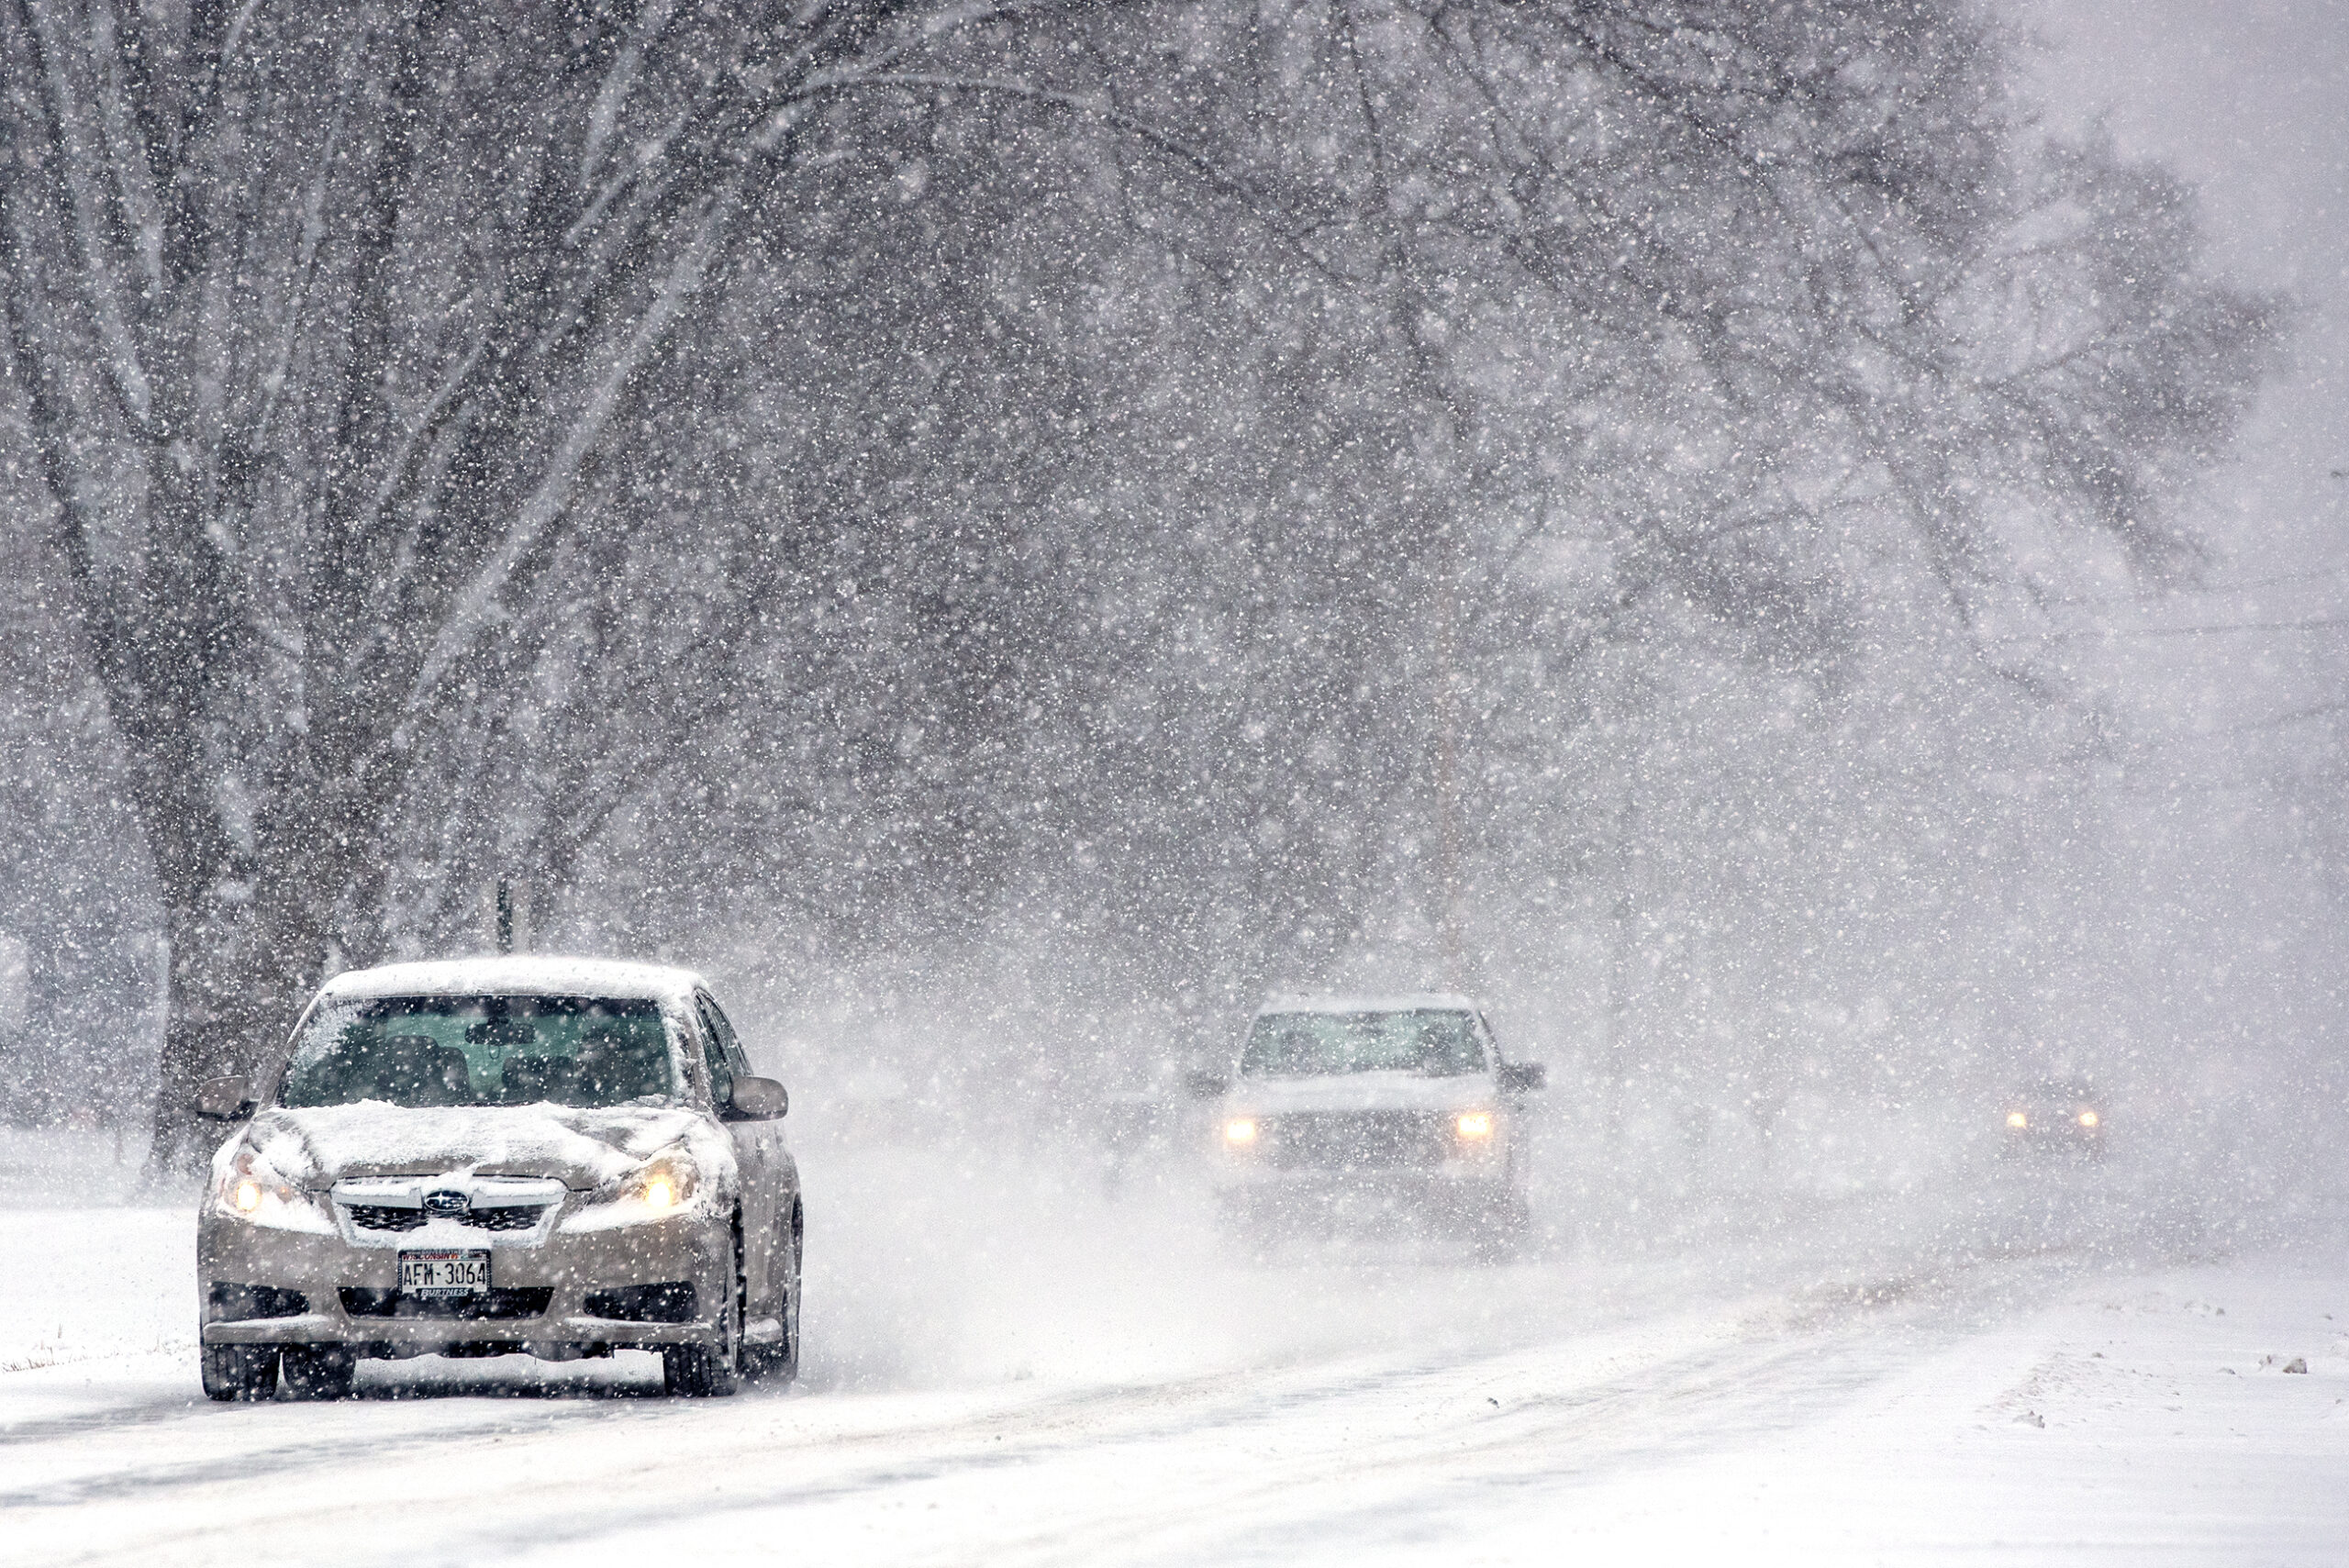 Winter storm upends holiday travel for Wisconsinites, prompts ‘energy emergency declaration’